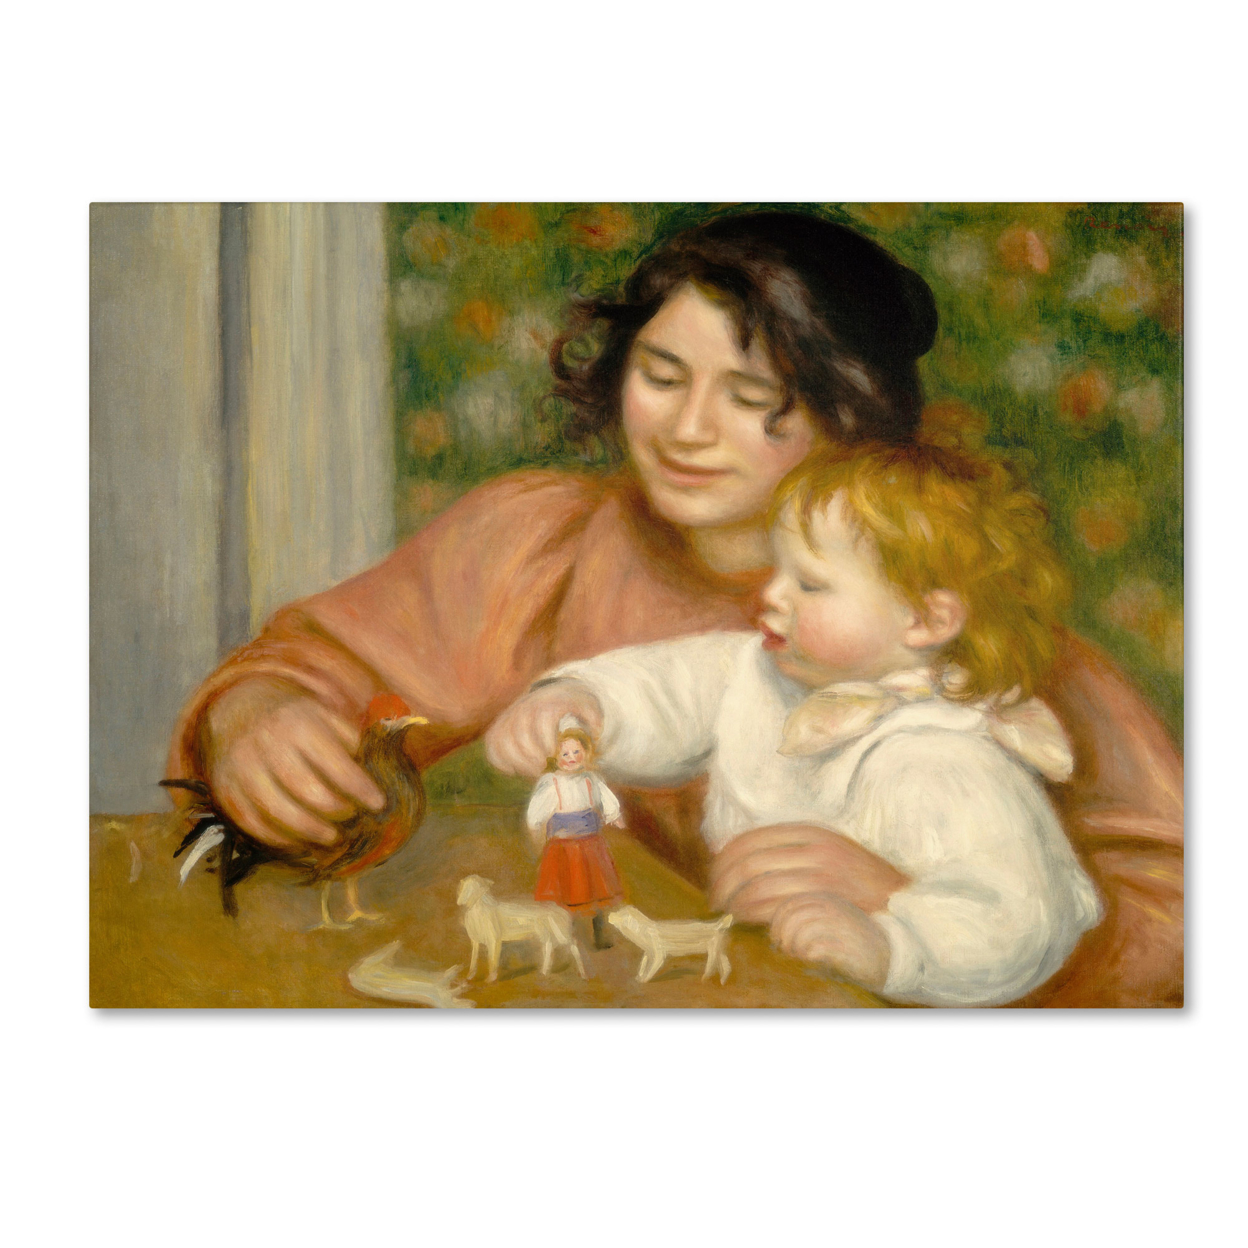 Pierre Renoir 'Child With Toys 1895-96' Canvas Wall Art 35 X 47 Inches